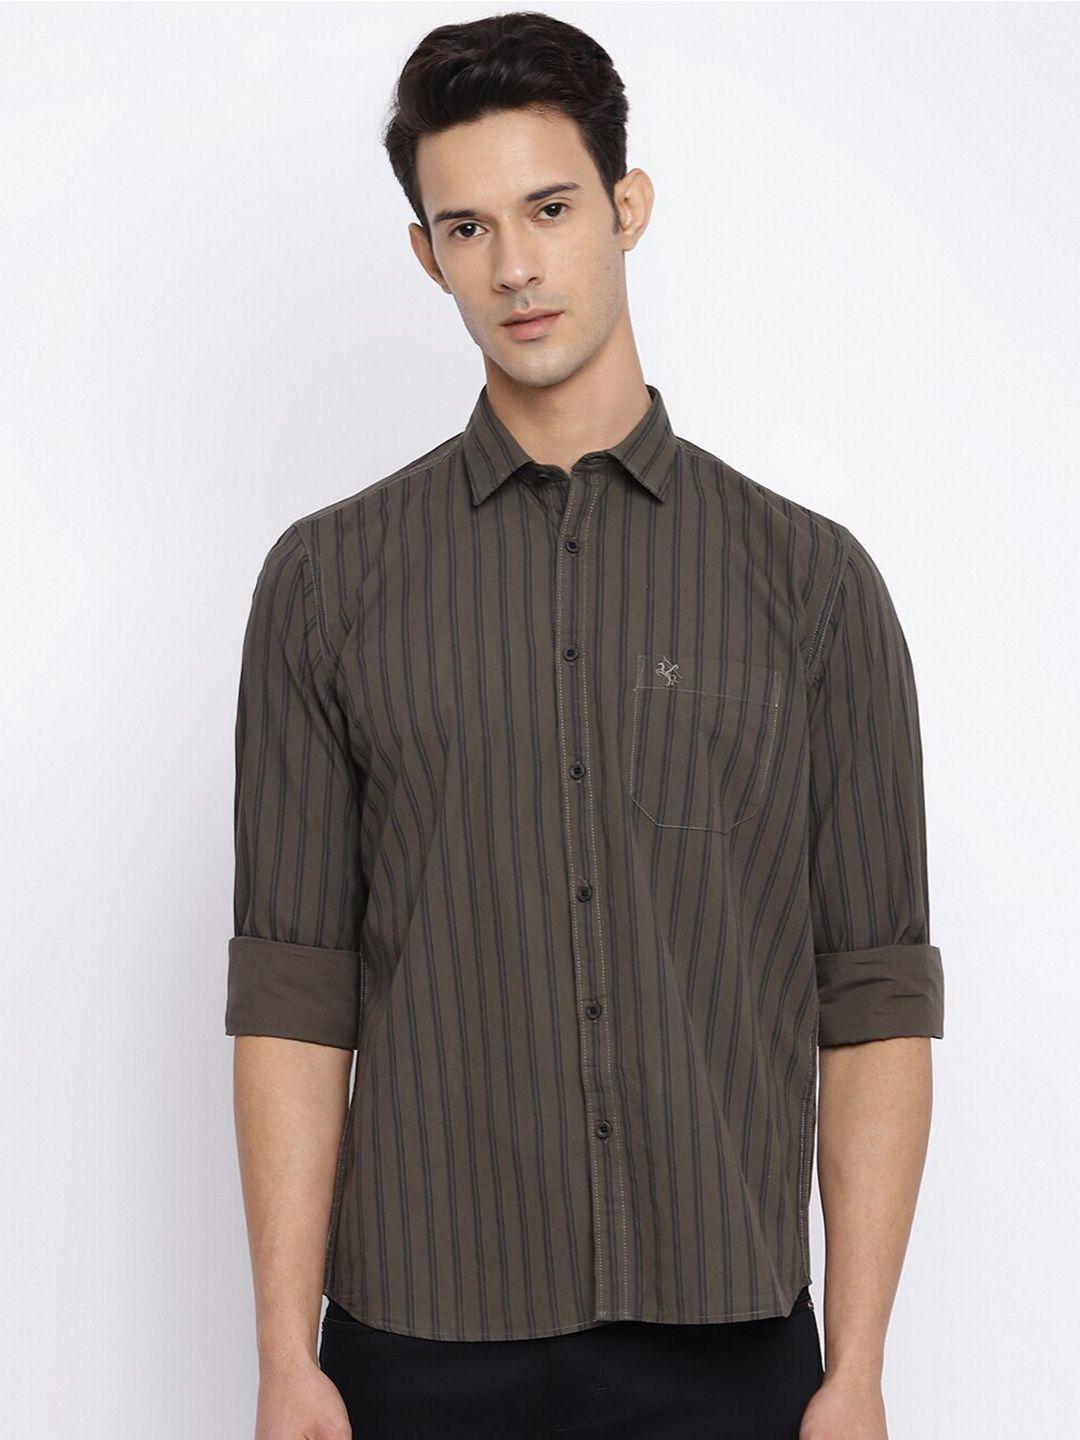 cantabil-men-olive-green-striped-cotton-casual-shirt